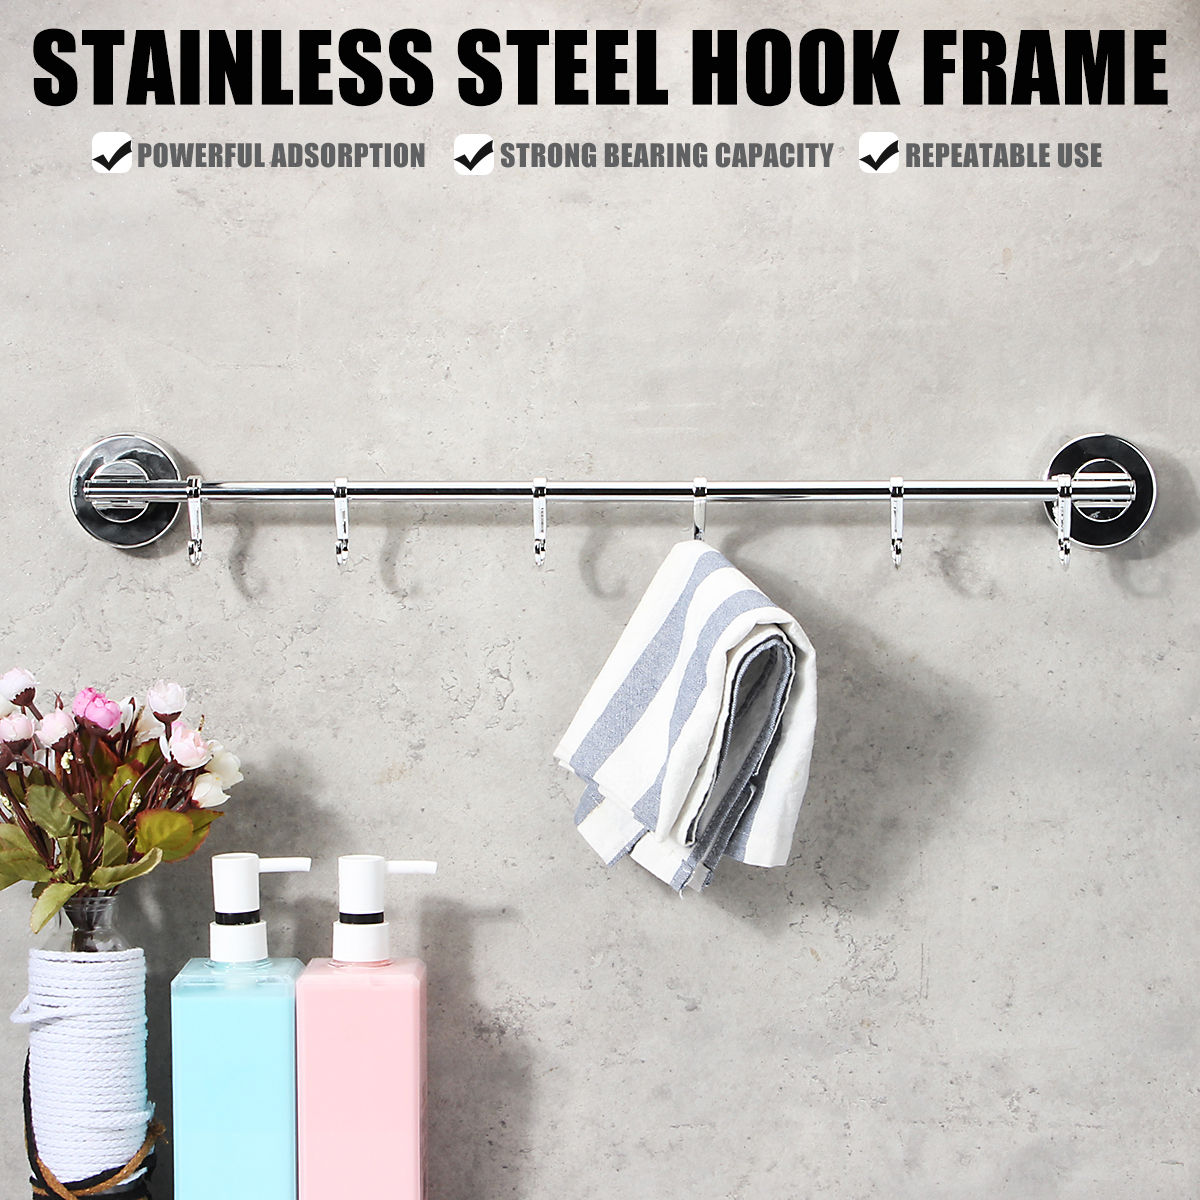 Stainless-Steel-Suction-Cup-Hanger-Hooks-Kitchen-Rack-Clothes-Hanging-Holders-Home-Hooks-1589624-1